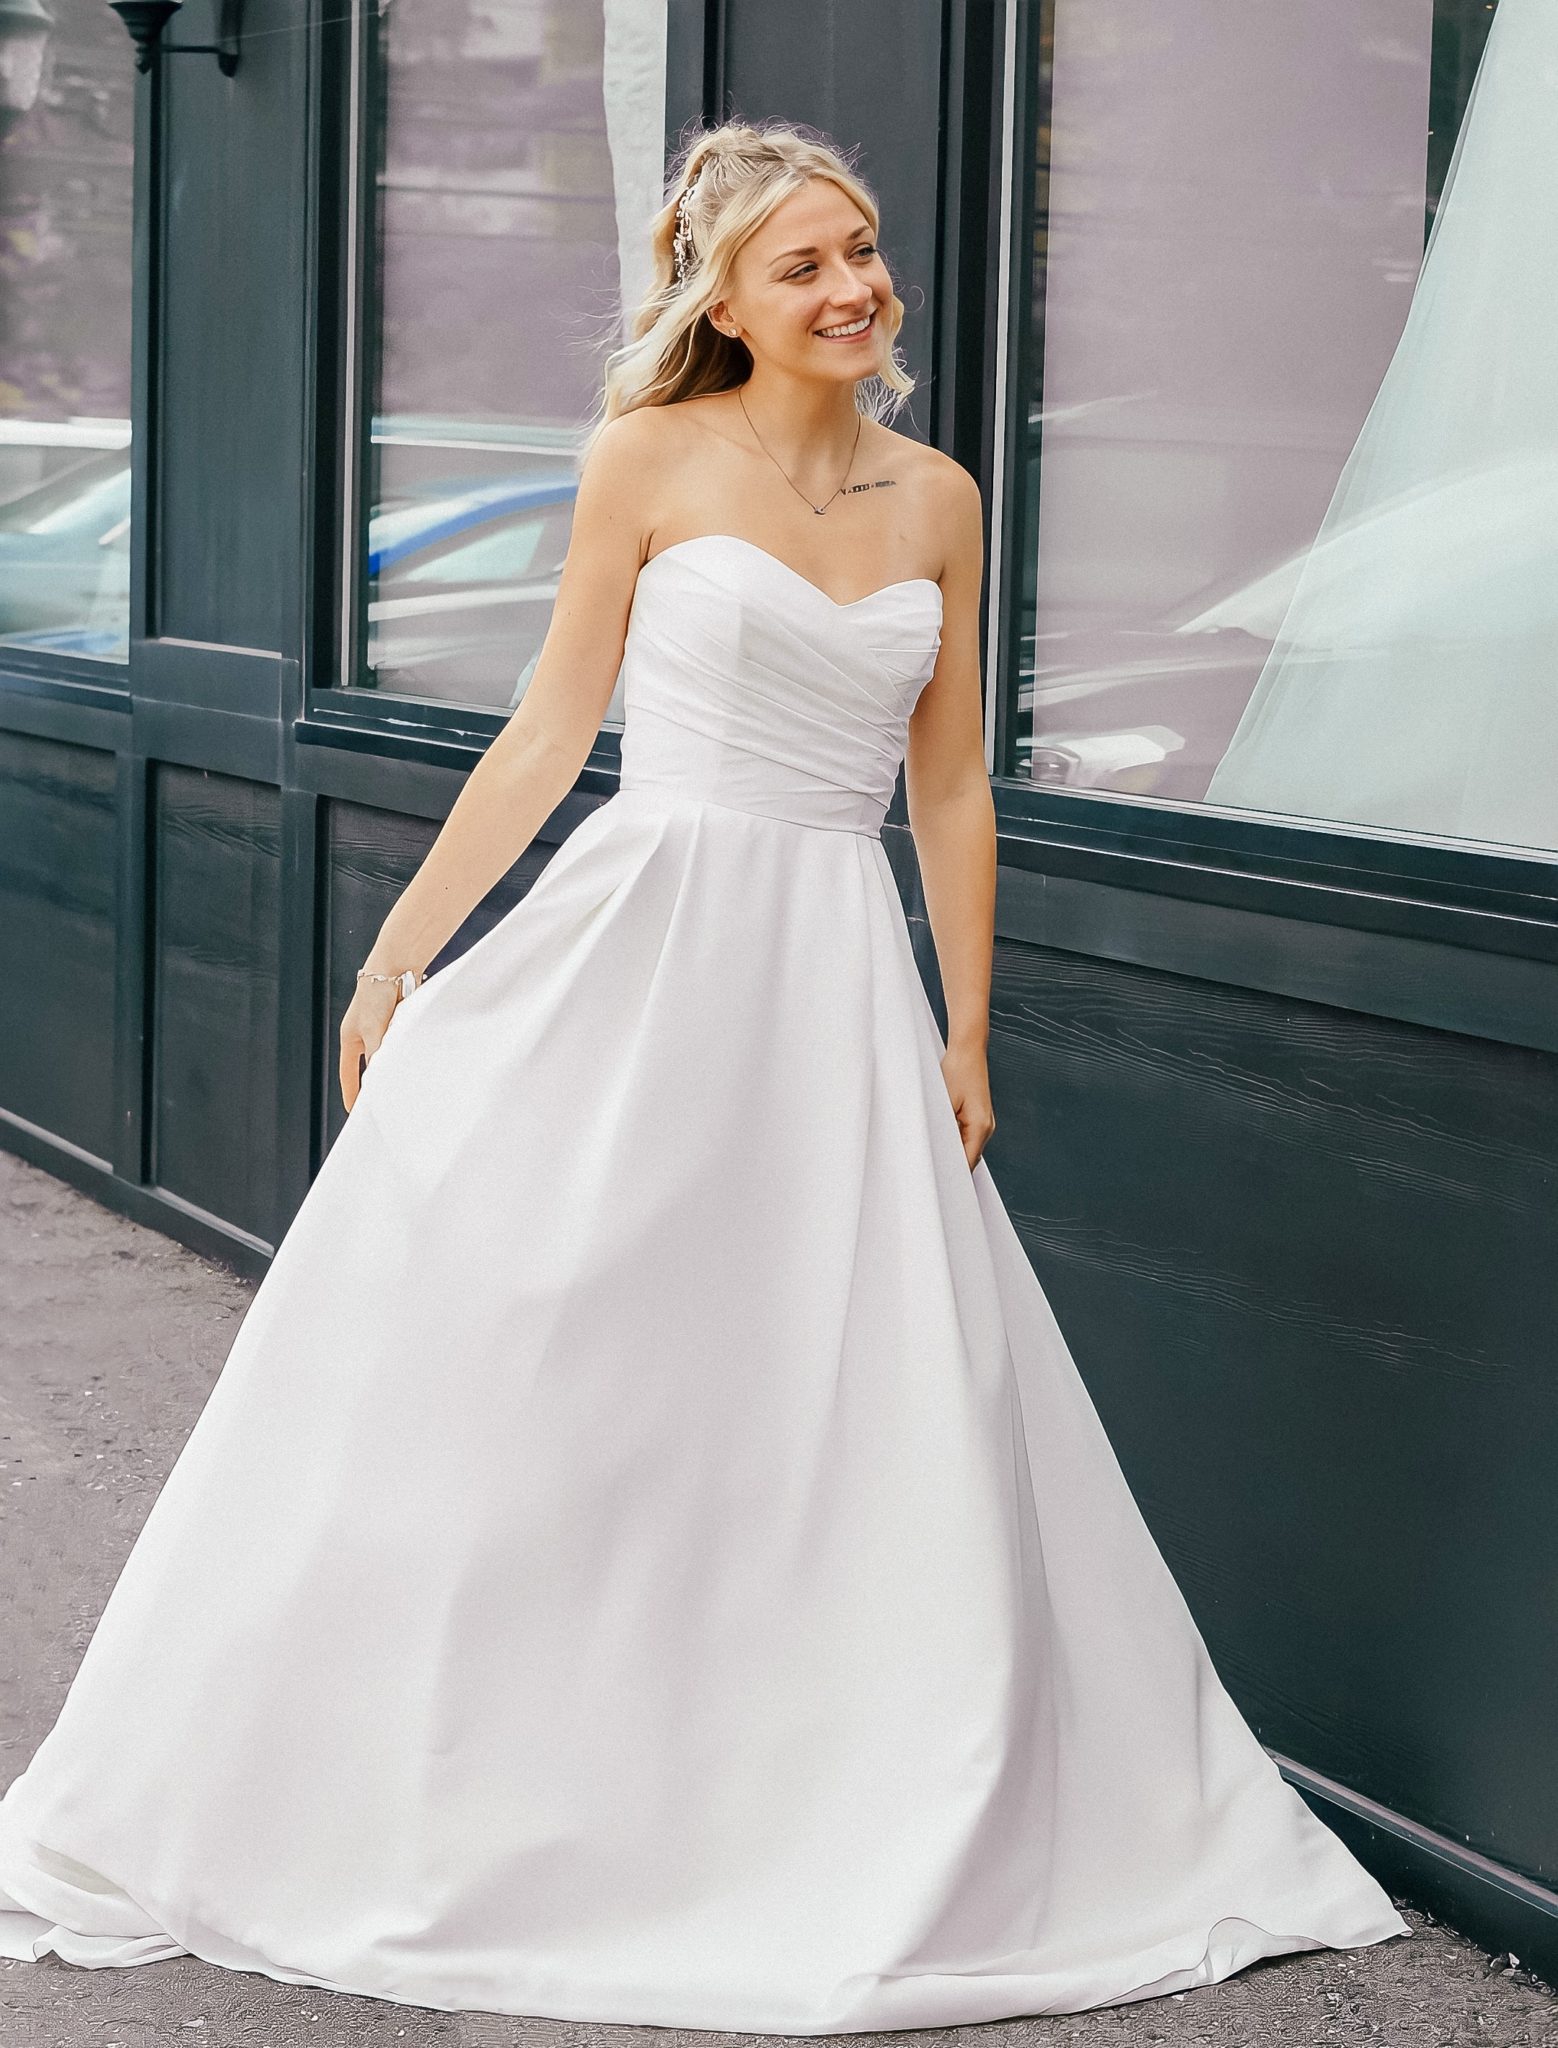 shot of woman outside store in white a line wedding dress